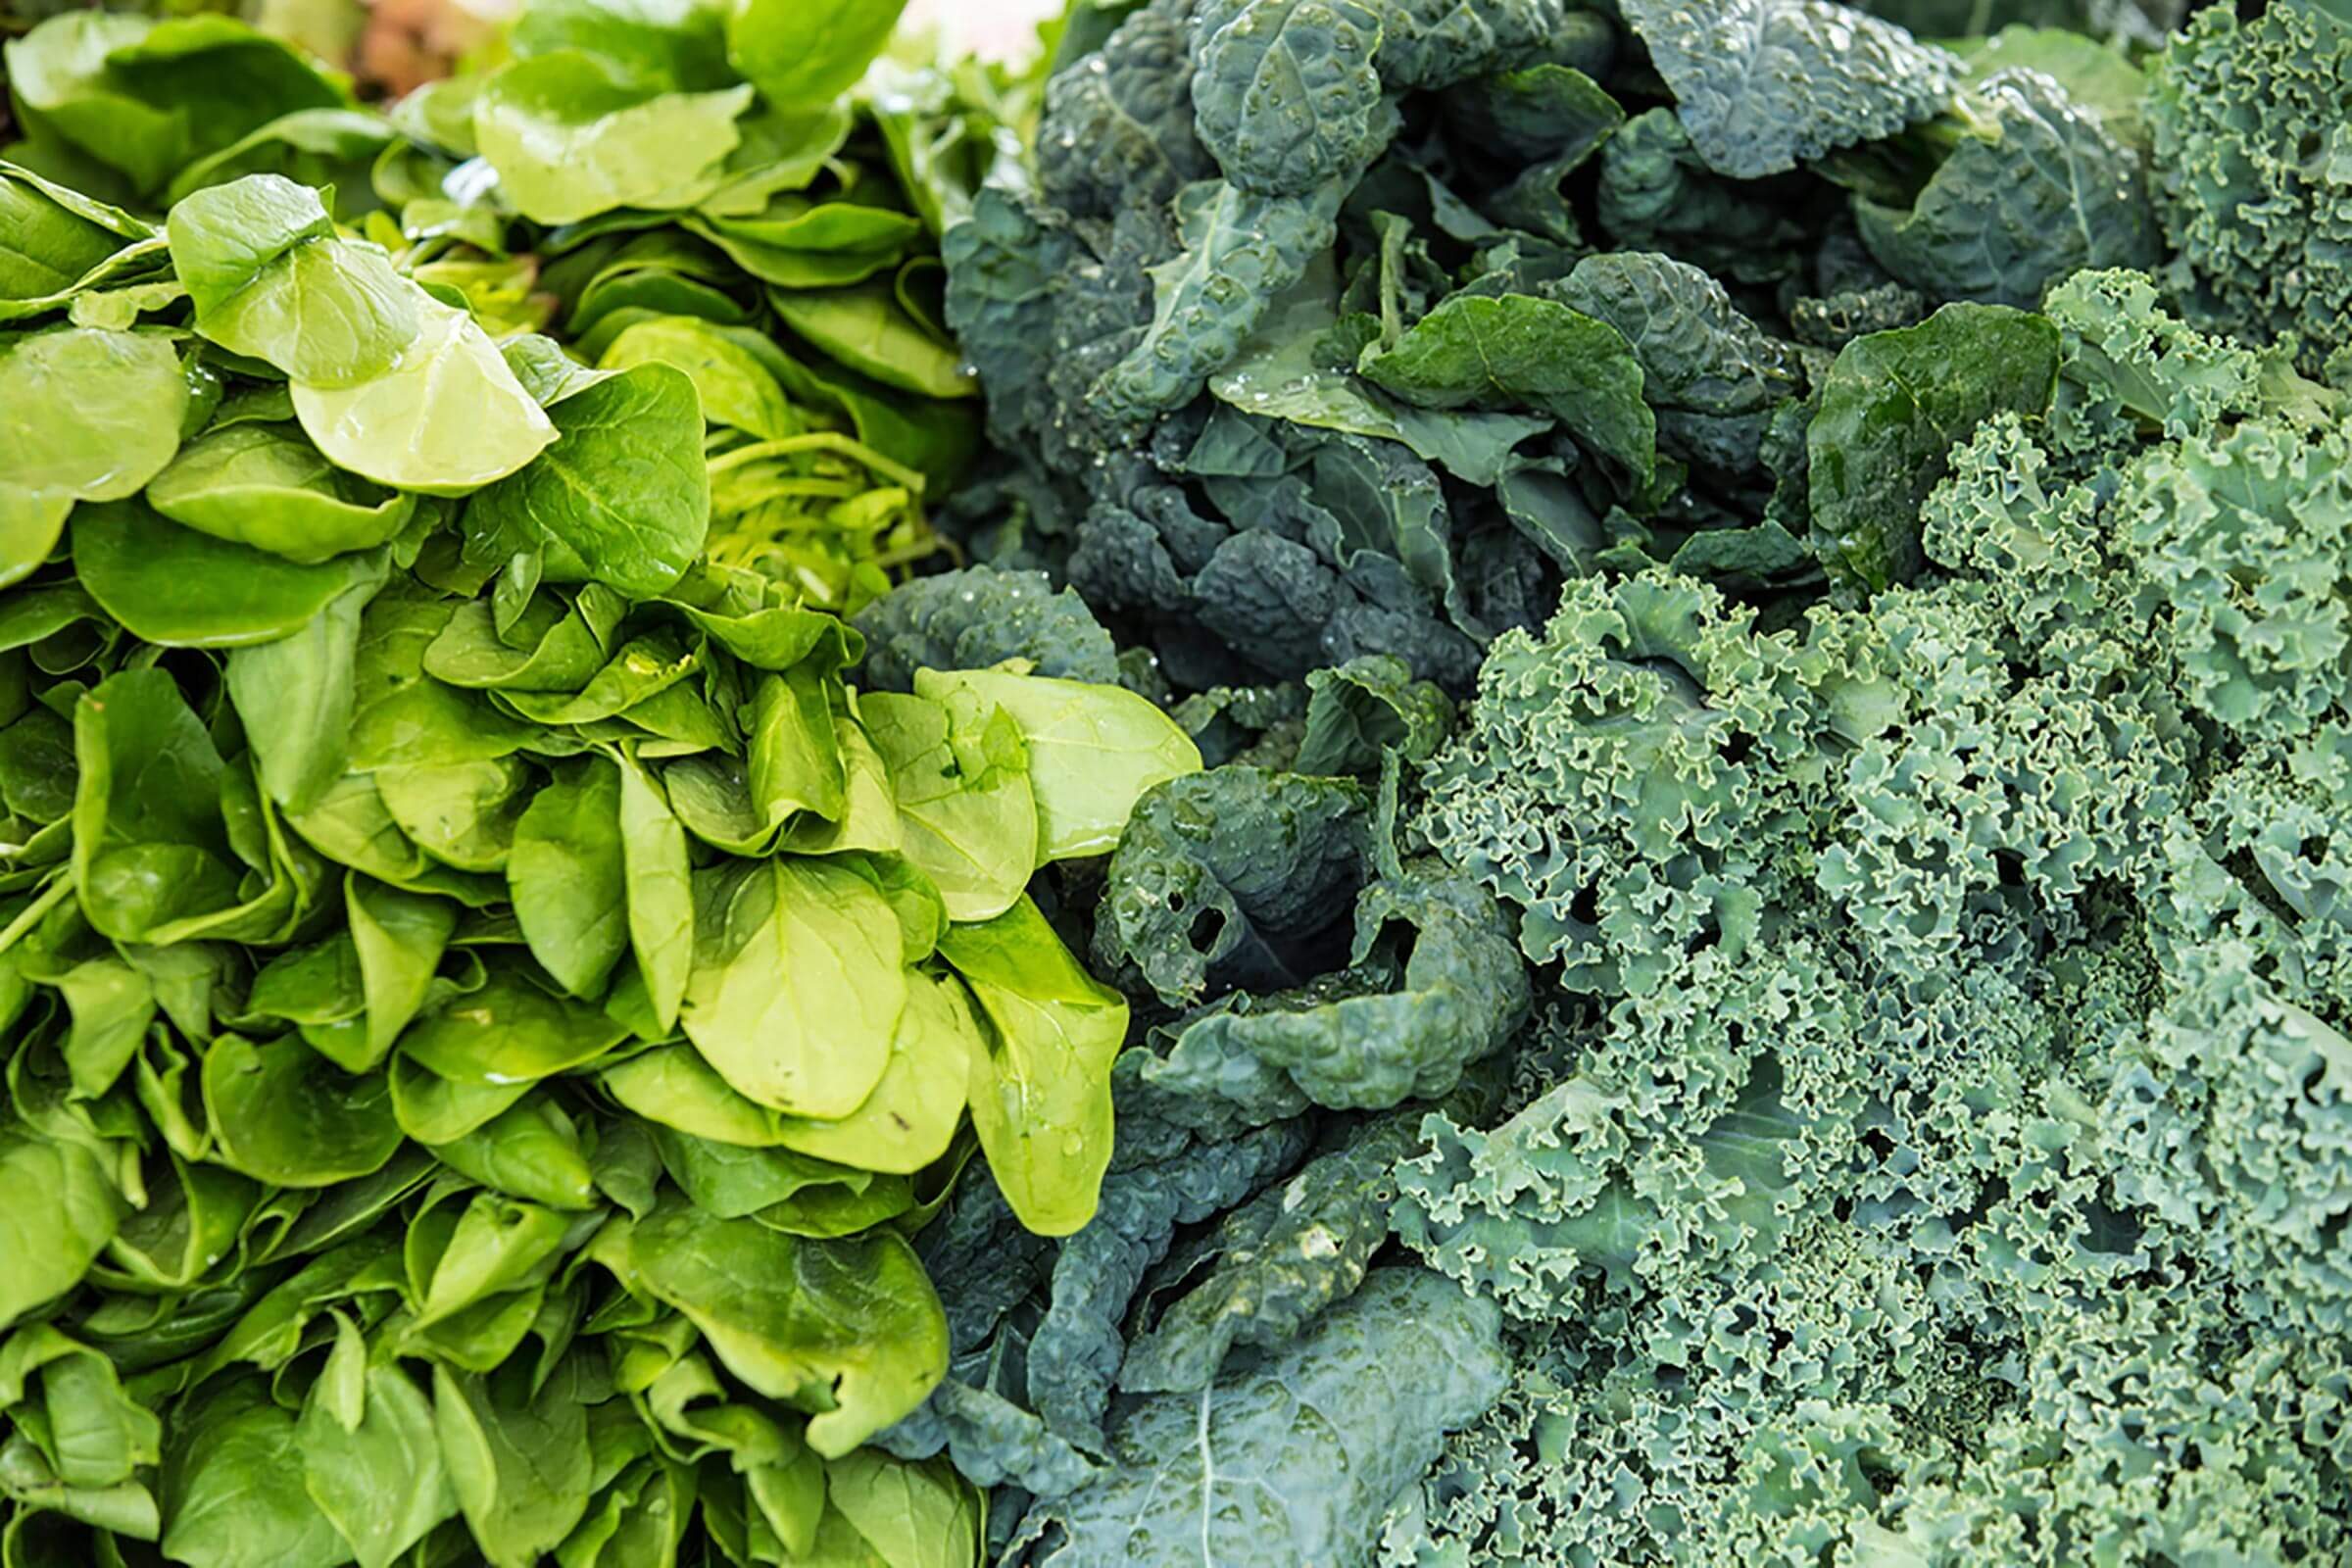 15 Healthiest Vegetables To Eat, According To Nutritionists